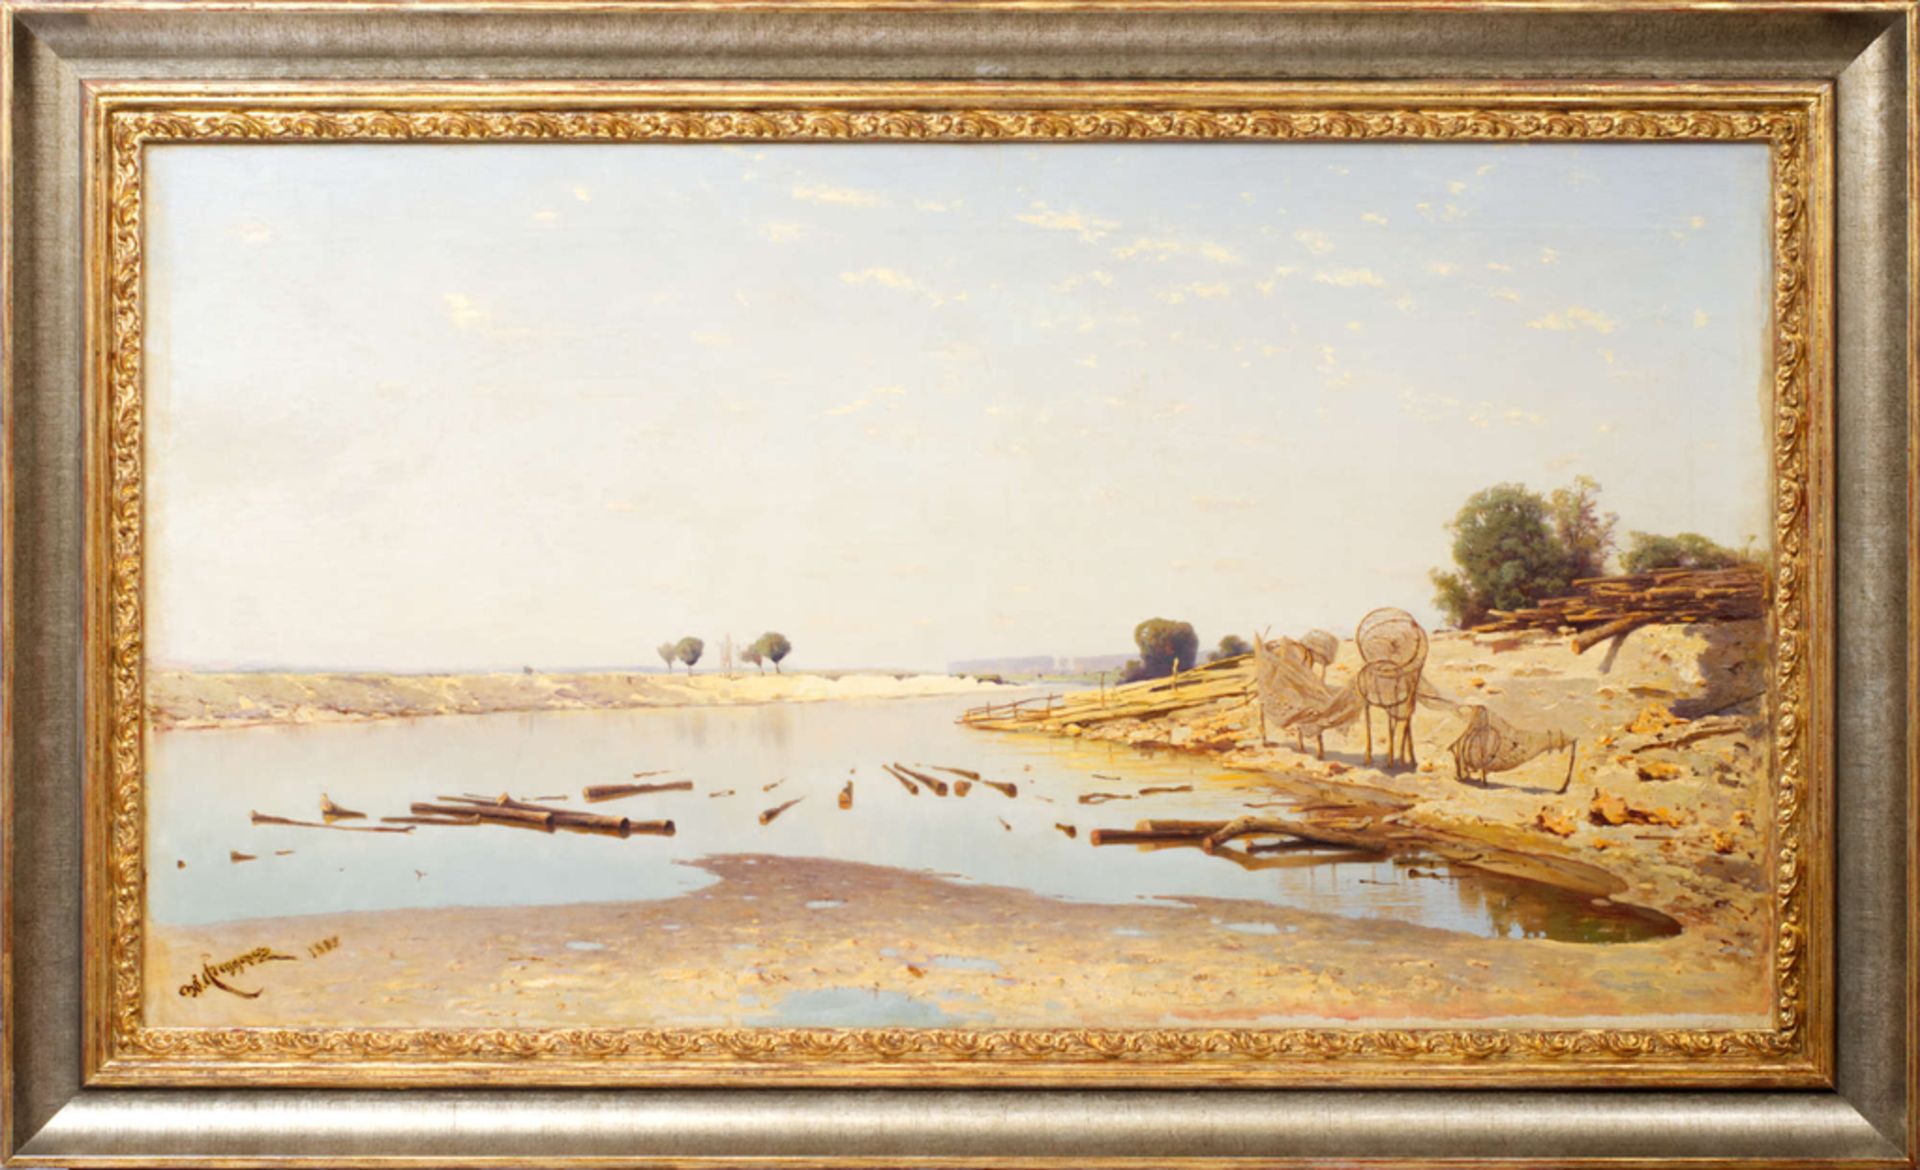 Landscape with river by Julijs Feders (1838-1909)